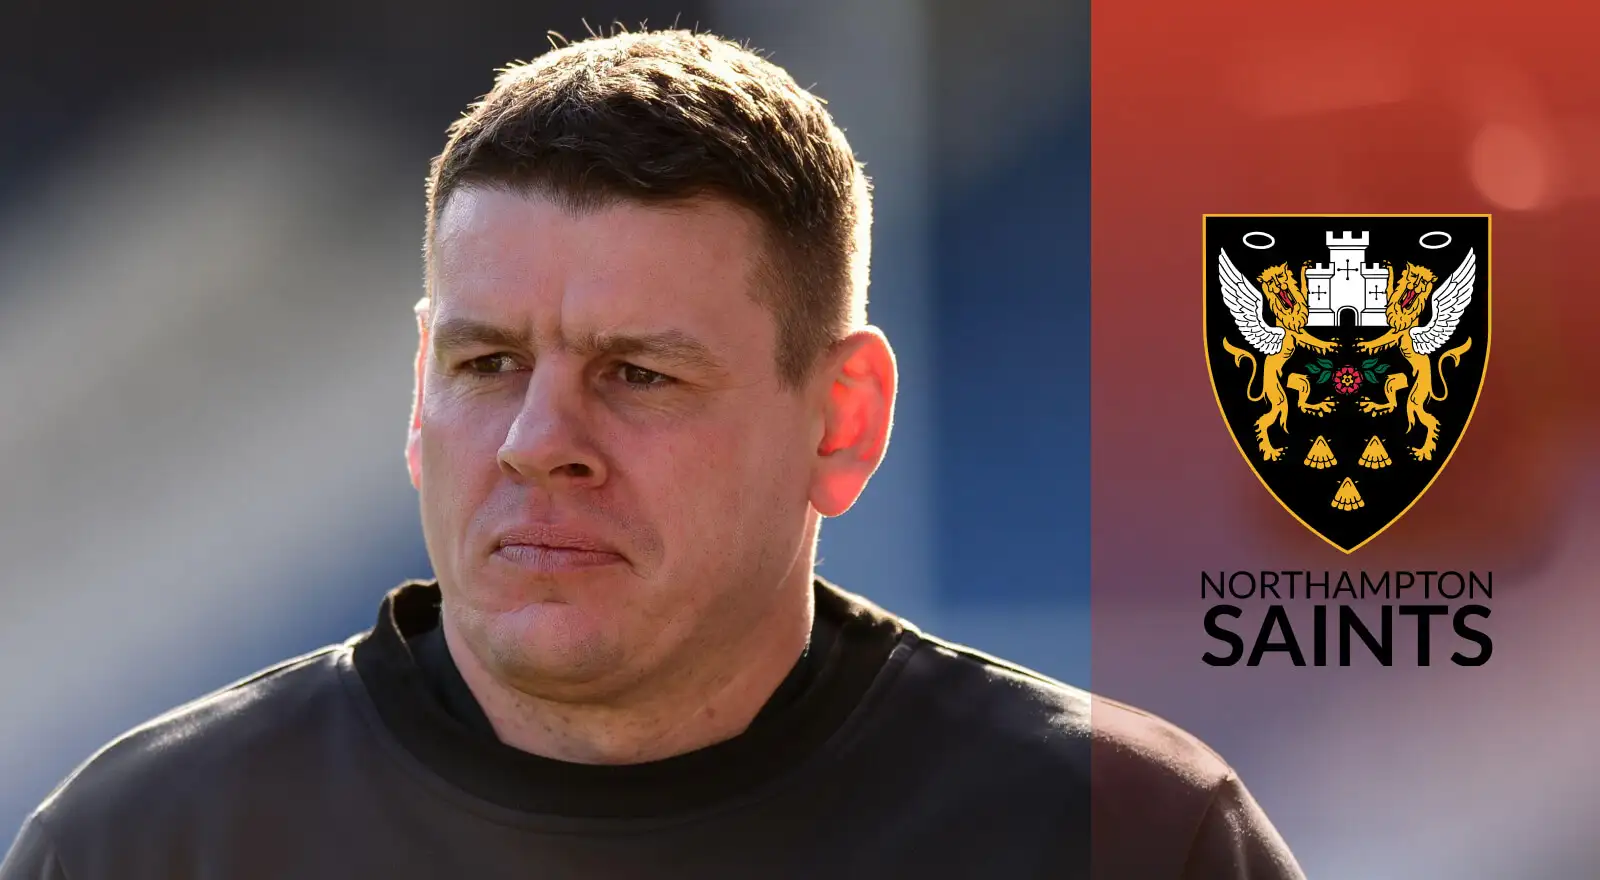 Lee Radford has completed a code switch to rugby union.